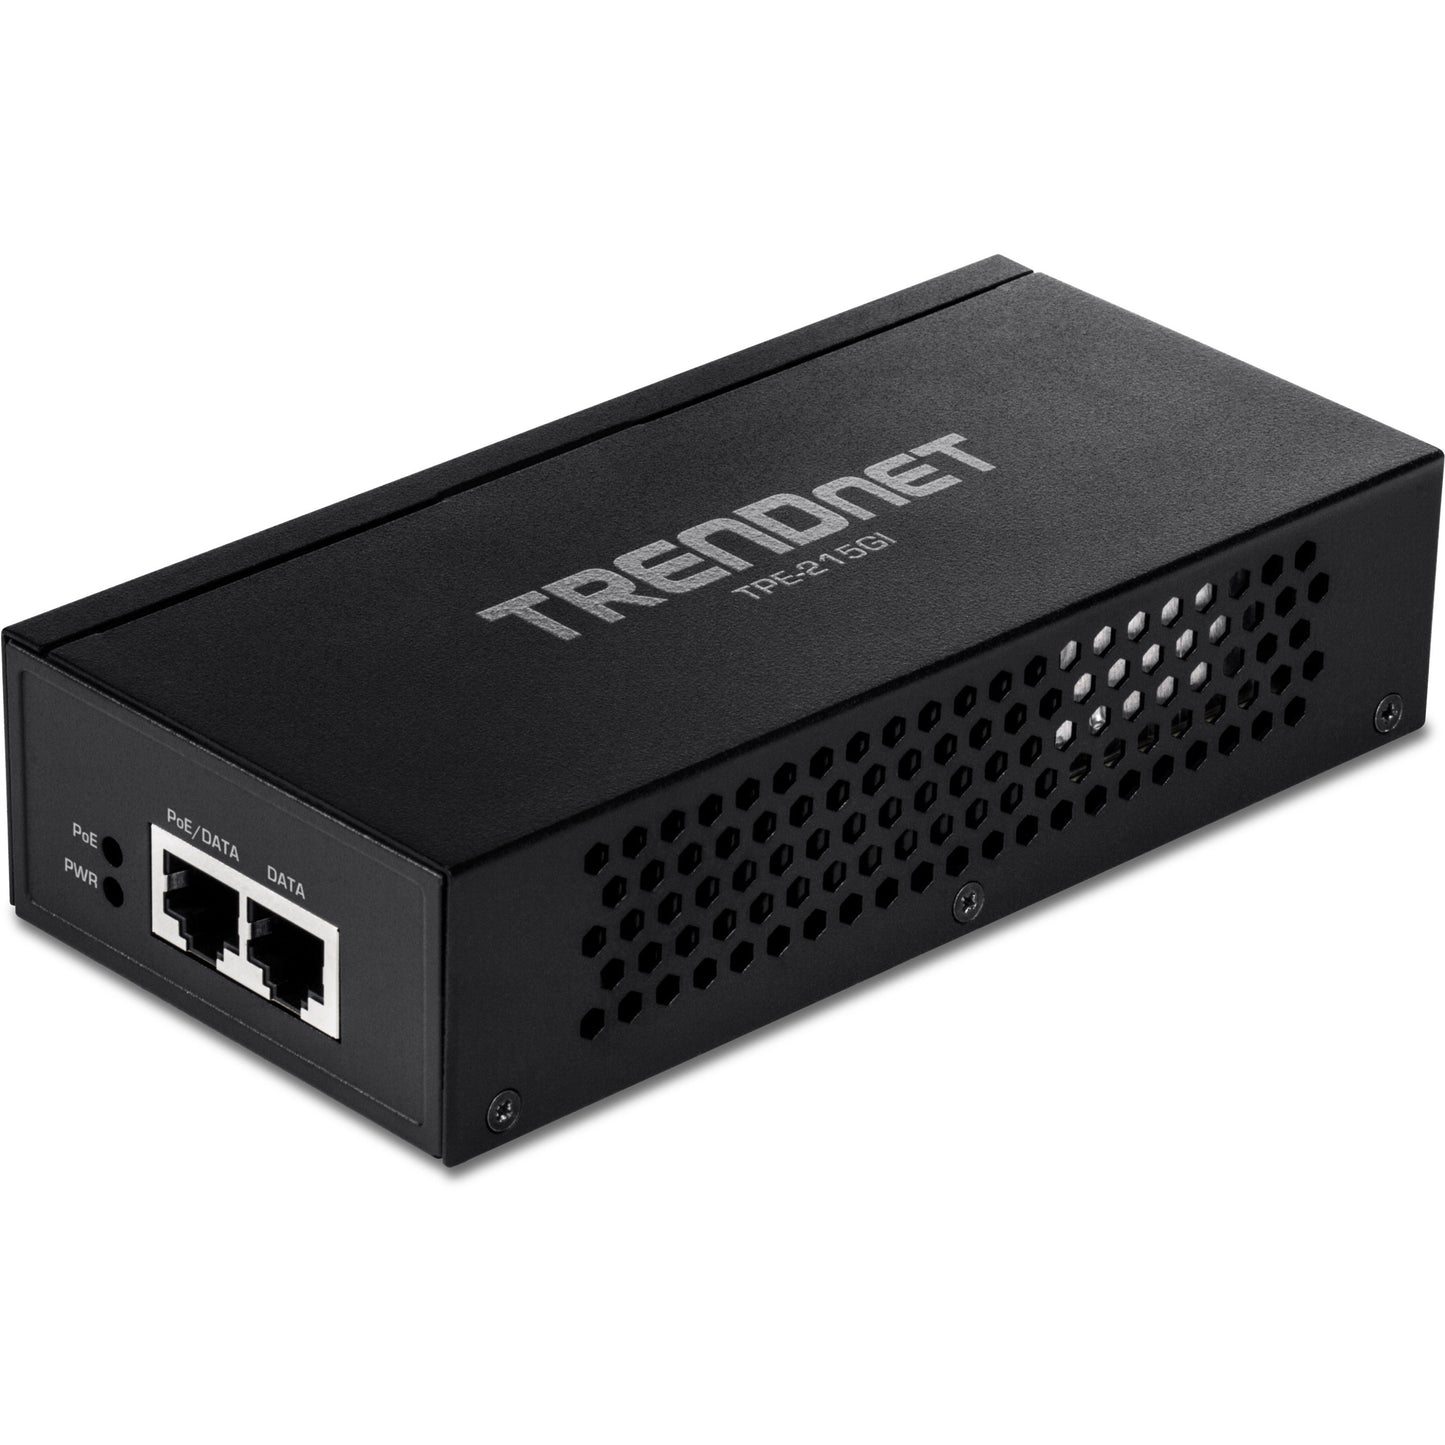 TRENDnet 2.5G PoE+ Injector TPE-215GI PoE (15.4W) or PoE+ (30W) Converts a non-PoE Port to a PoE+ 2.5G Port 2.5GBASE-T Compliant Integrated Power Supply Network a PoE device up to 100m (328 ft.)